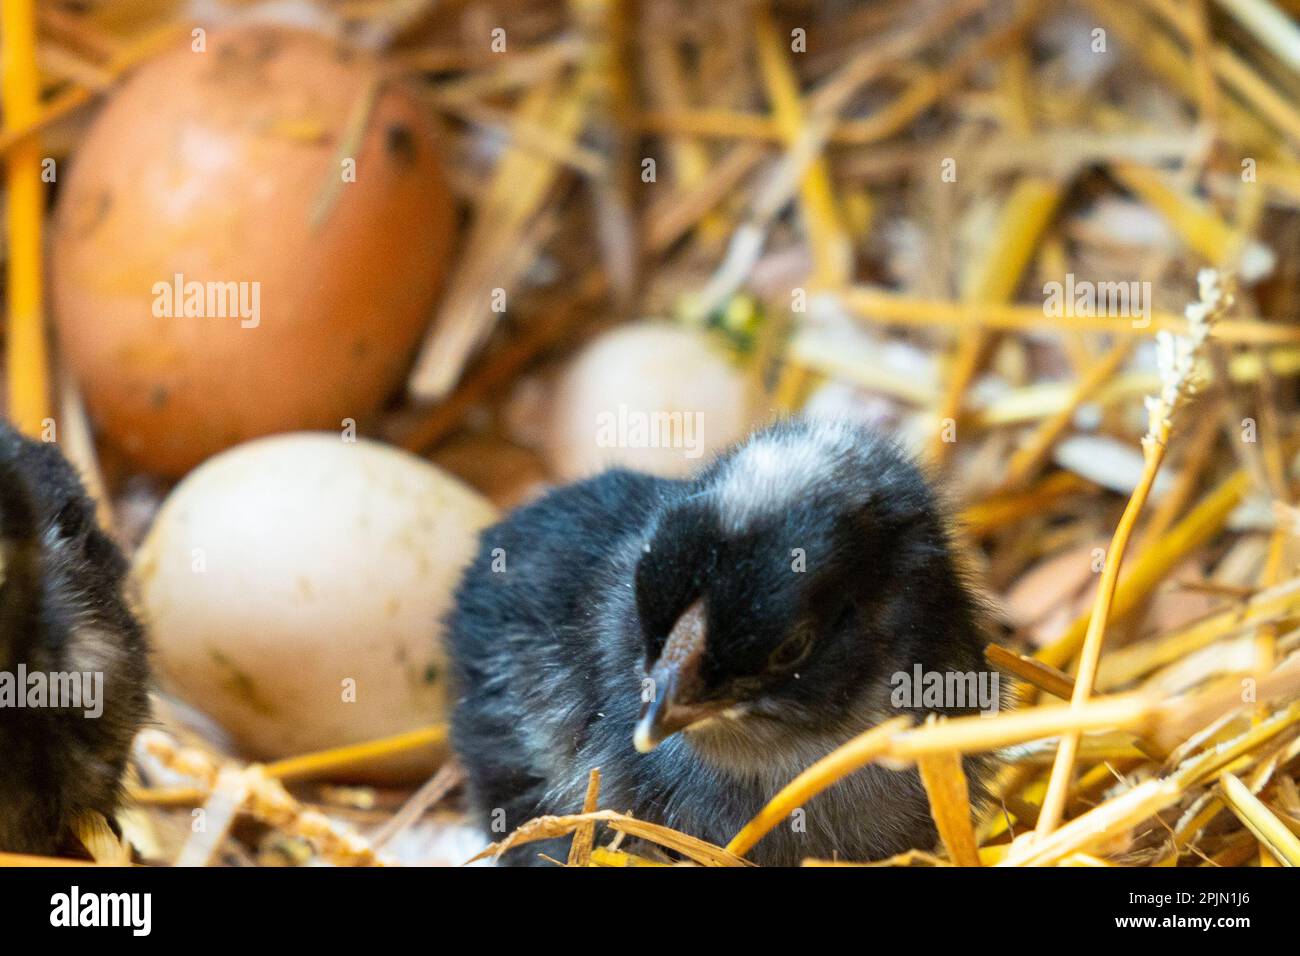 A close-up view of a freshly hatched chick and more chicken eggs in straw Stock Photo